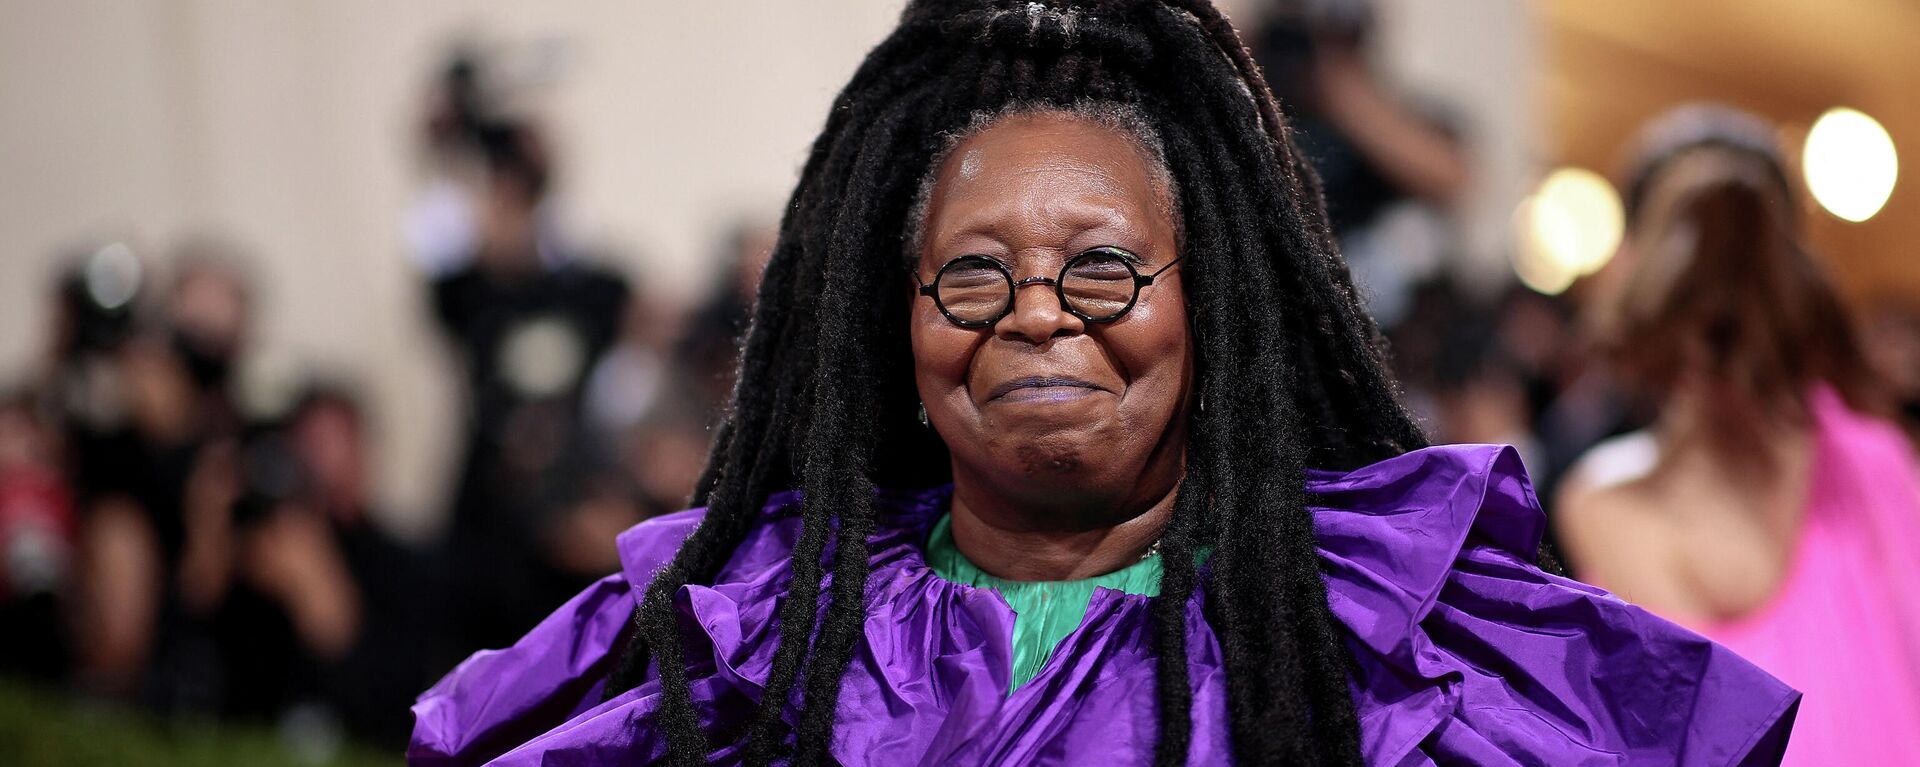 Whoopi Goldberg attends The 2021 Met Gala Celebrating In America: A Lexicon Of Fashion at Metropolitan Museum of Art on September 13, 2021 in New York City.  - Sputnik International, 1920, 26.03.2022